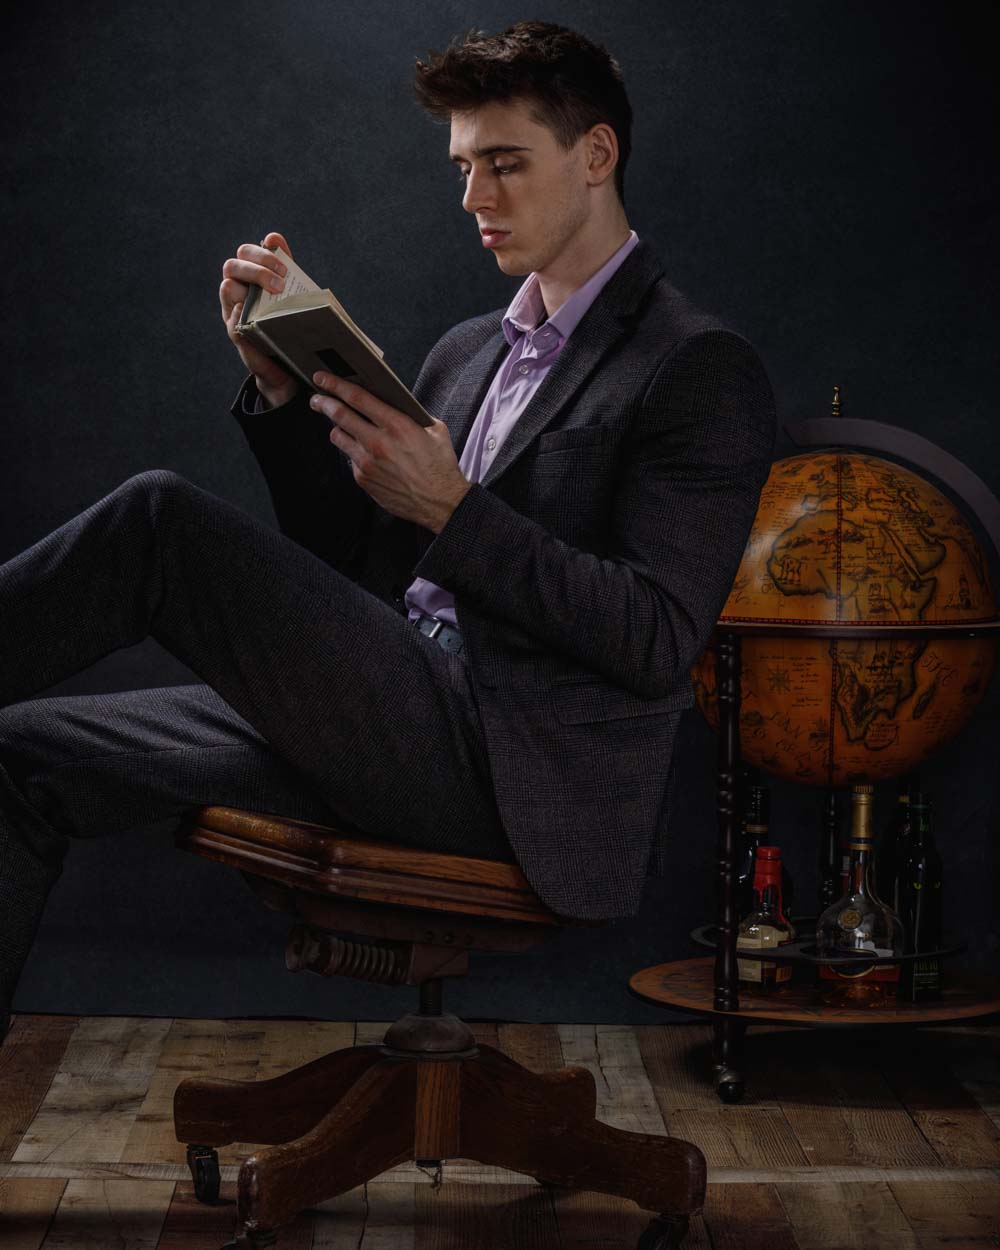 Jonathan reading a book at our Chicago model photography studio